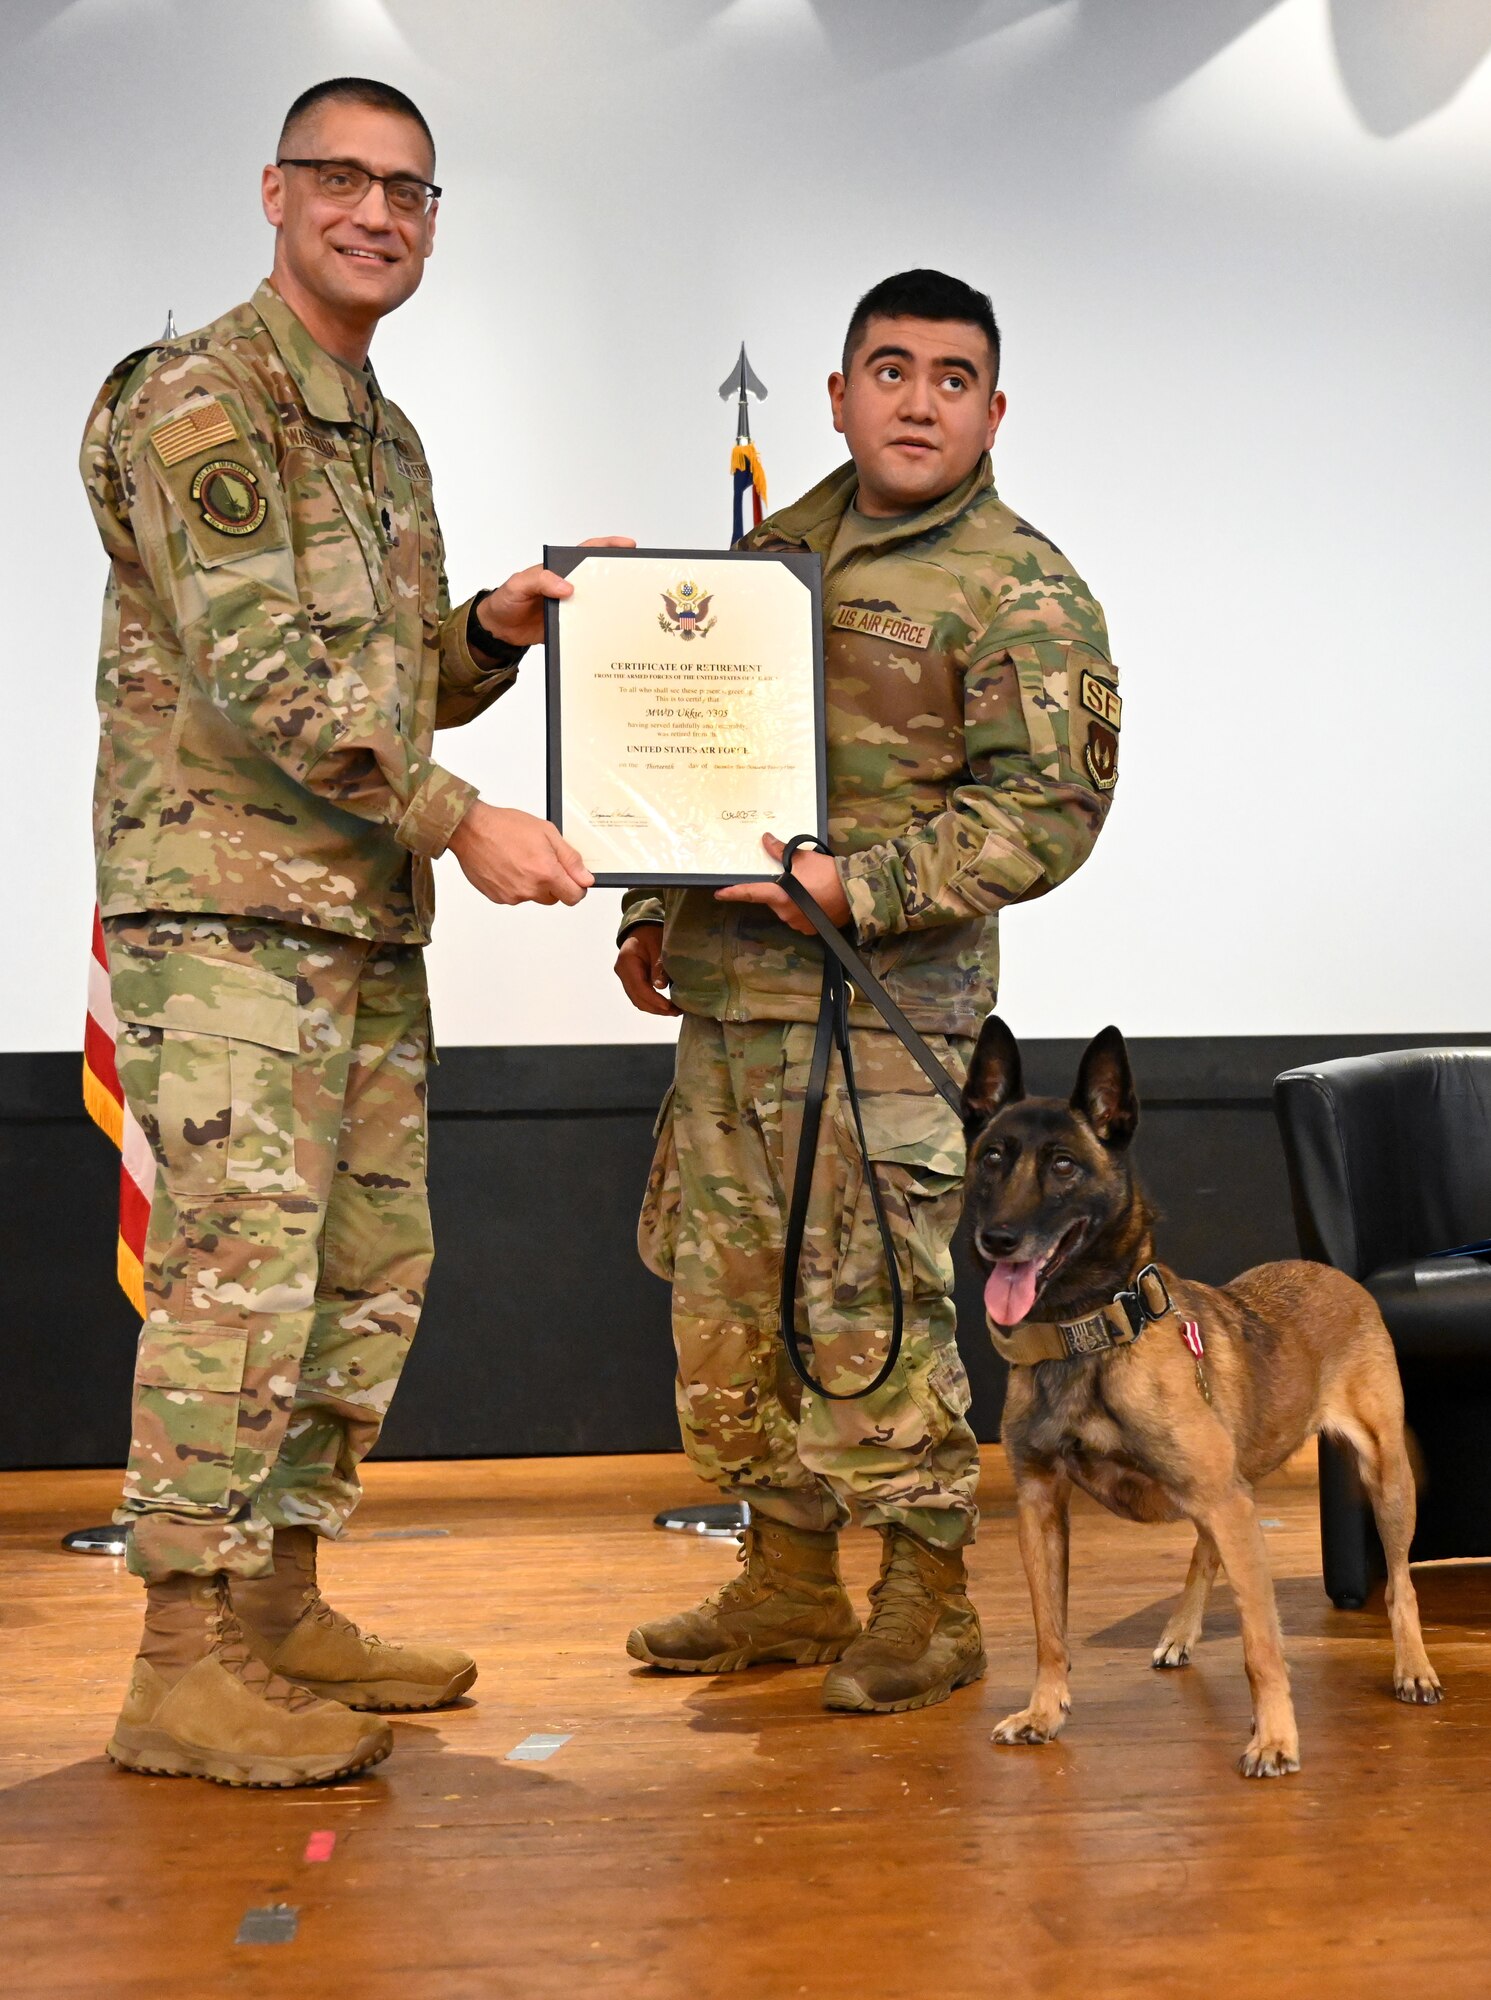 U.S. Air Force Lt. Col. Ben Washburn, left, 48th Security Forces Squadron commander, presents a Certificate of Appreciation signed by the Secretary of the Air Force, to Military Working Dog Ukkie, 48th SFS, during her retirement ceremony at Royal Air Force Lakenheath, England, Dec. 13, 2023. Ukkie, who also received a Meritorius Service Medal, began her active-duty career in 2017, serving at RAF Mildenhall with the 100th Security Forces Squadron, before being transferred to the RAF Lakenheath kennels in 2020. She has been adopted by her first handler at RAF Mildenhall, and will live out her days with her family in Virginia. (U.S. Air Force photo by Karen Abeyasekere)